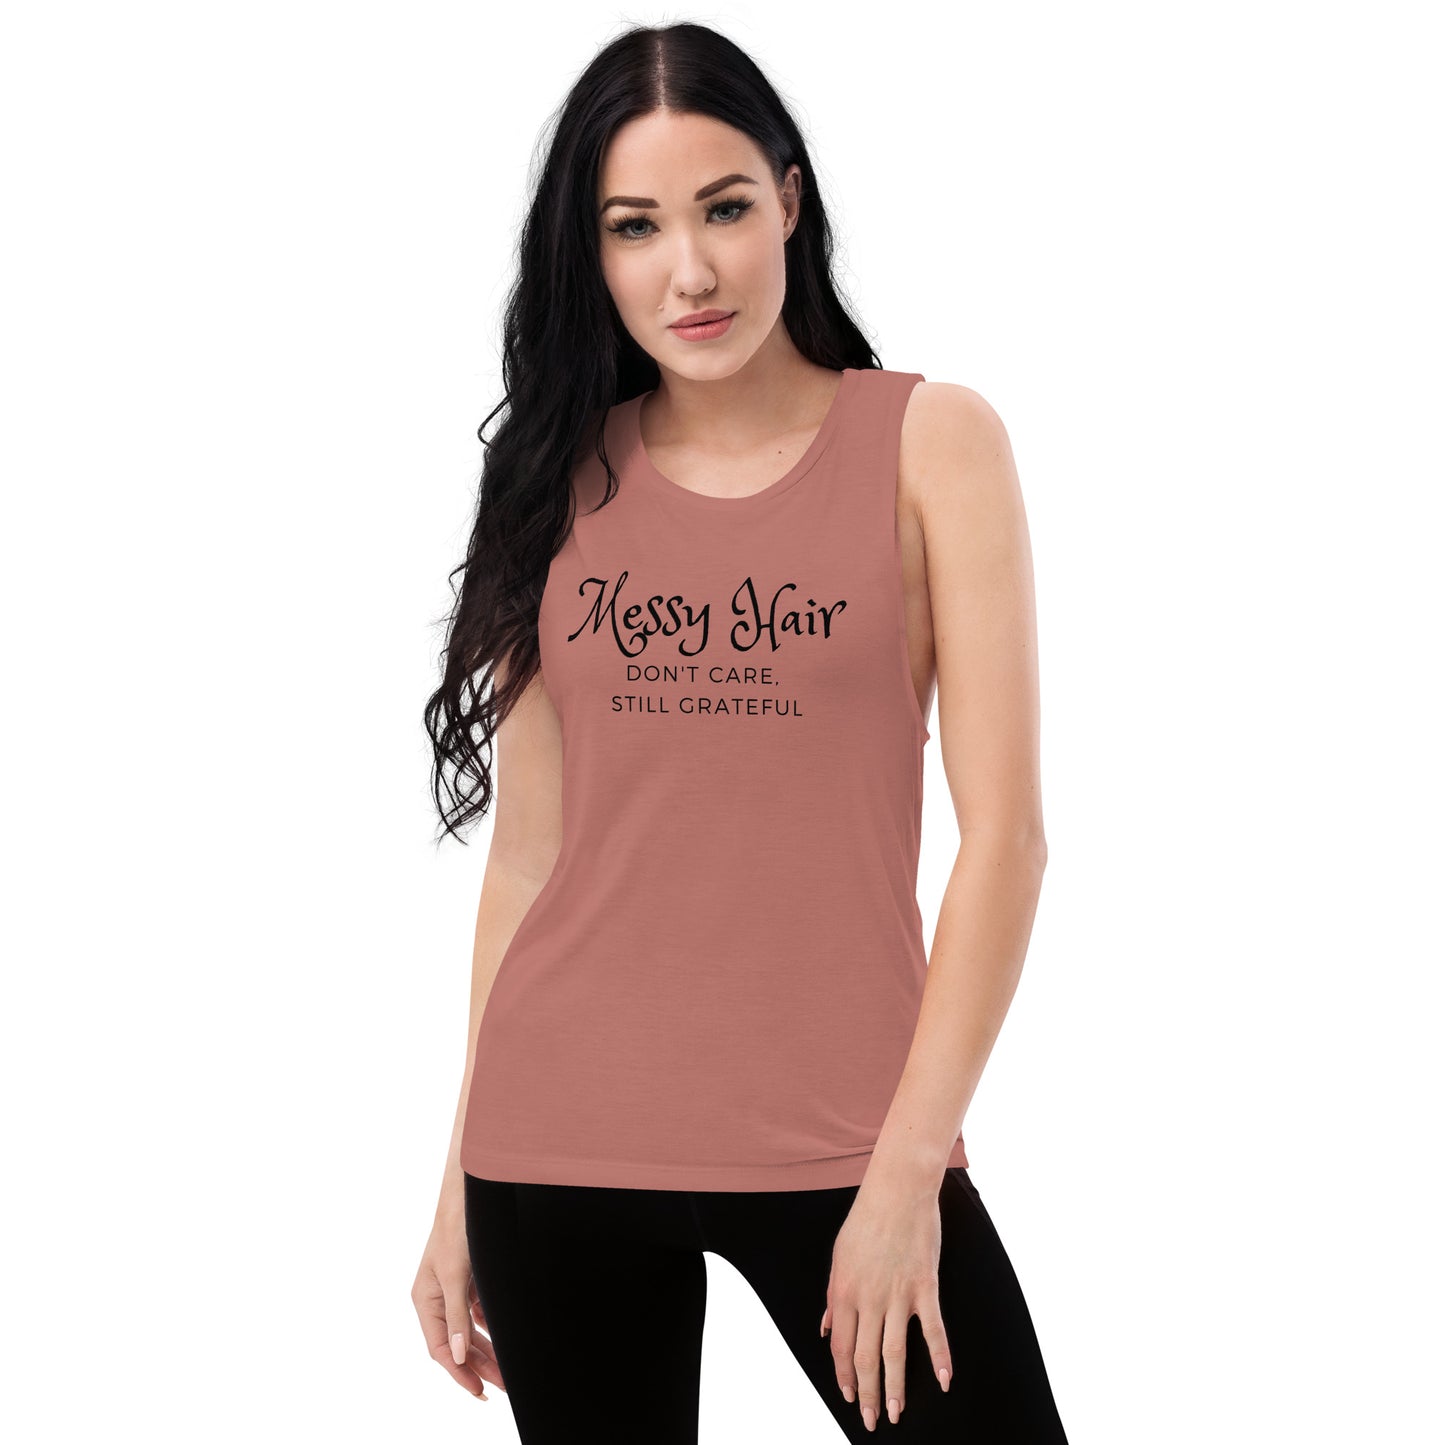 Messy Hair, Don't Care Womens’ Muscle Tank